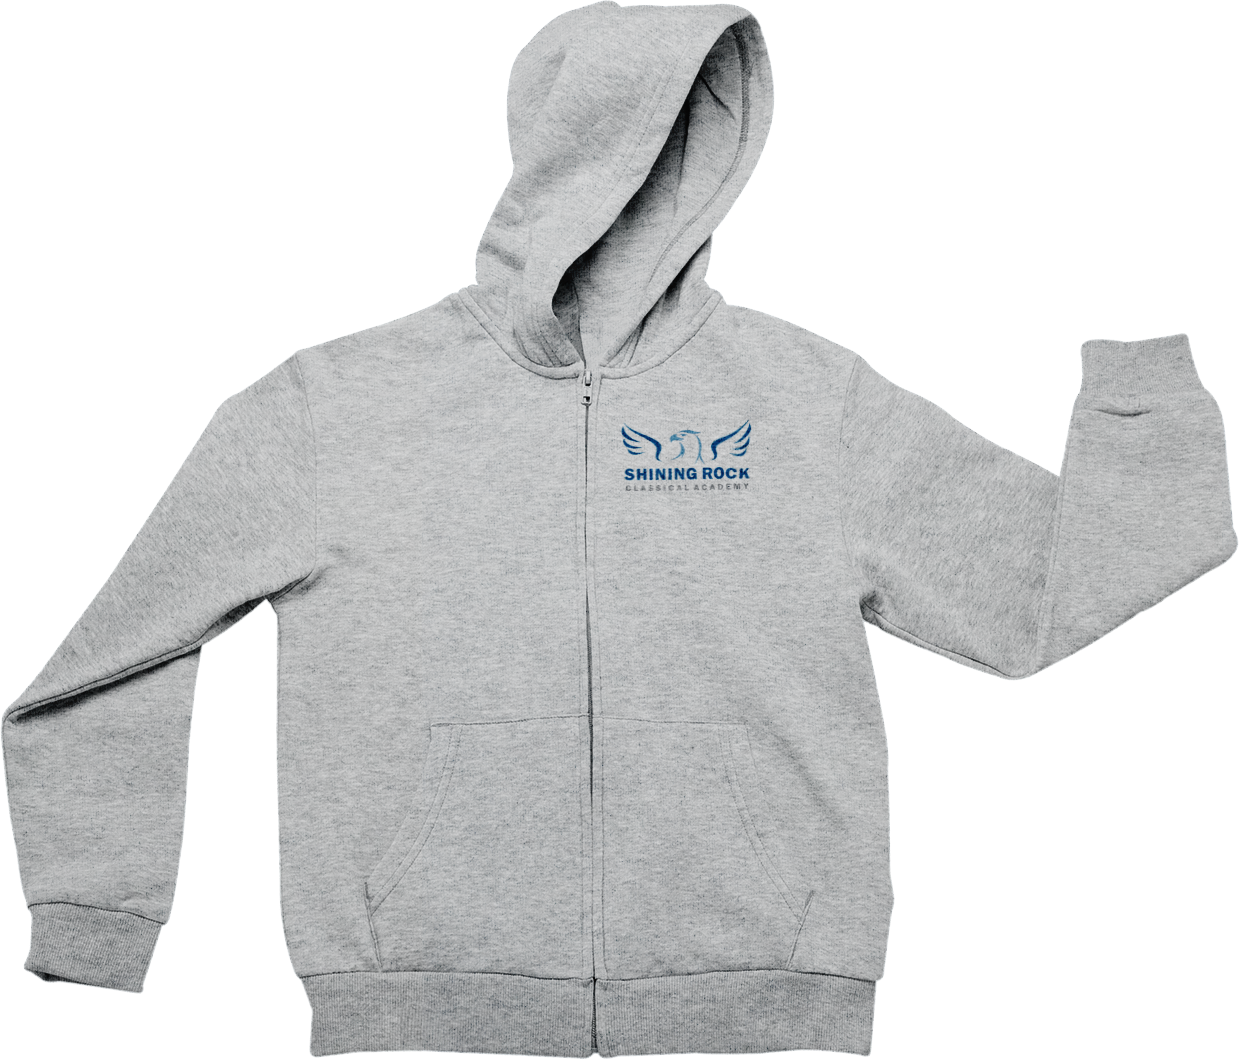 Shining Rock Classical Academy Embroidered School Hoodies - Pullover or Zippered